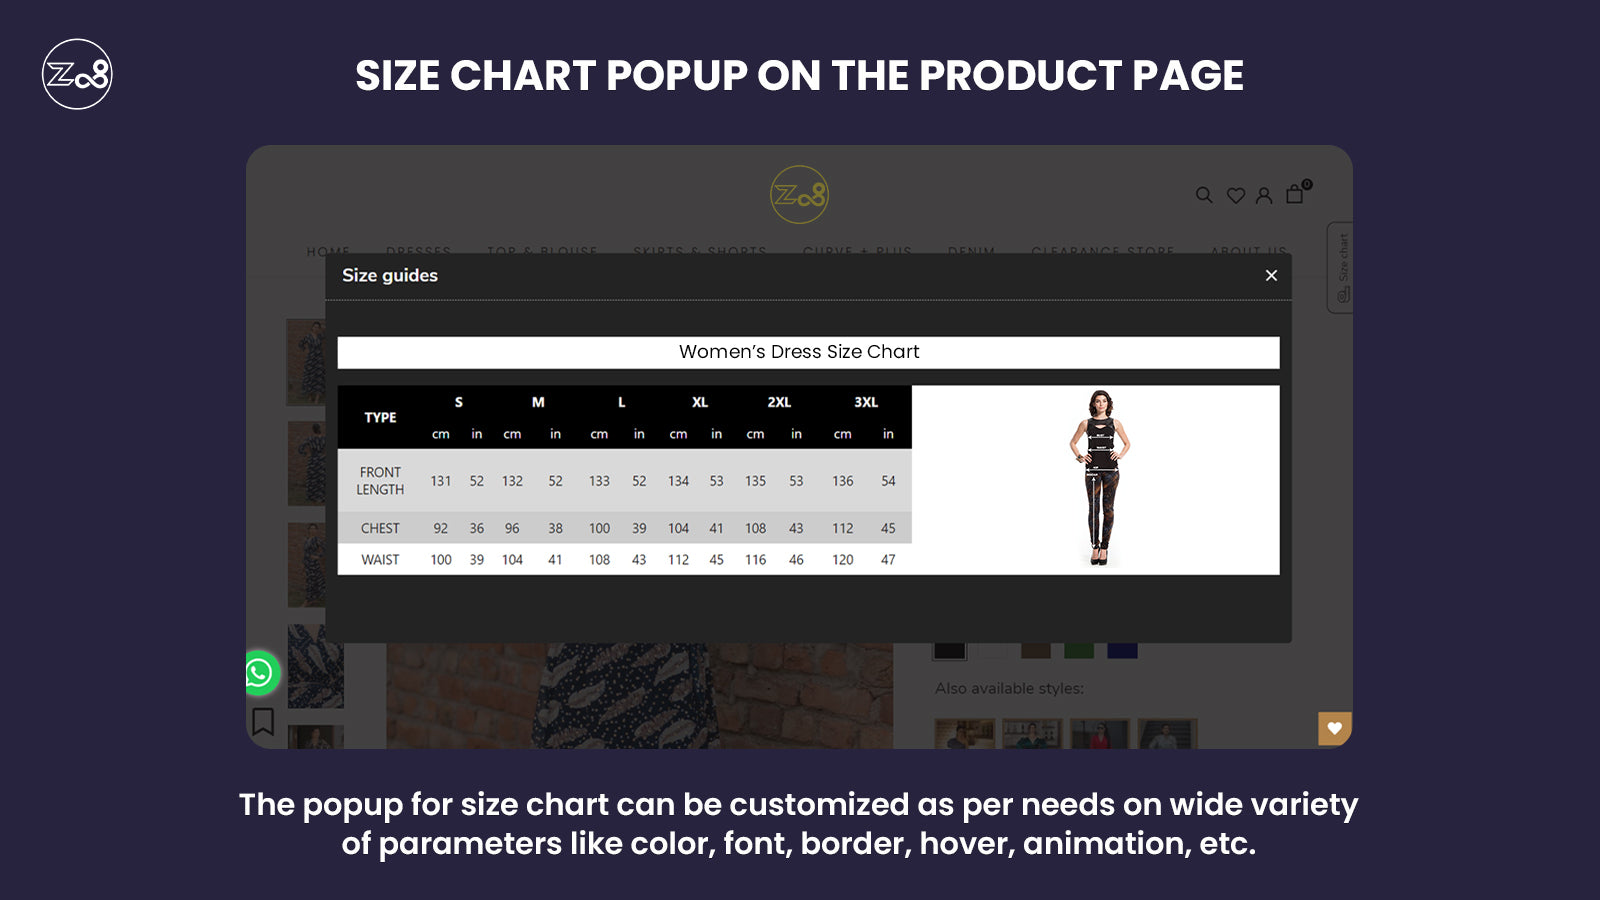 Z08 Size chart app - The popup of size chart is mobile responsiv